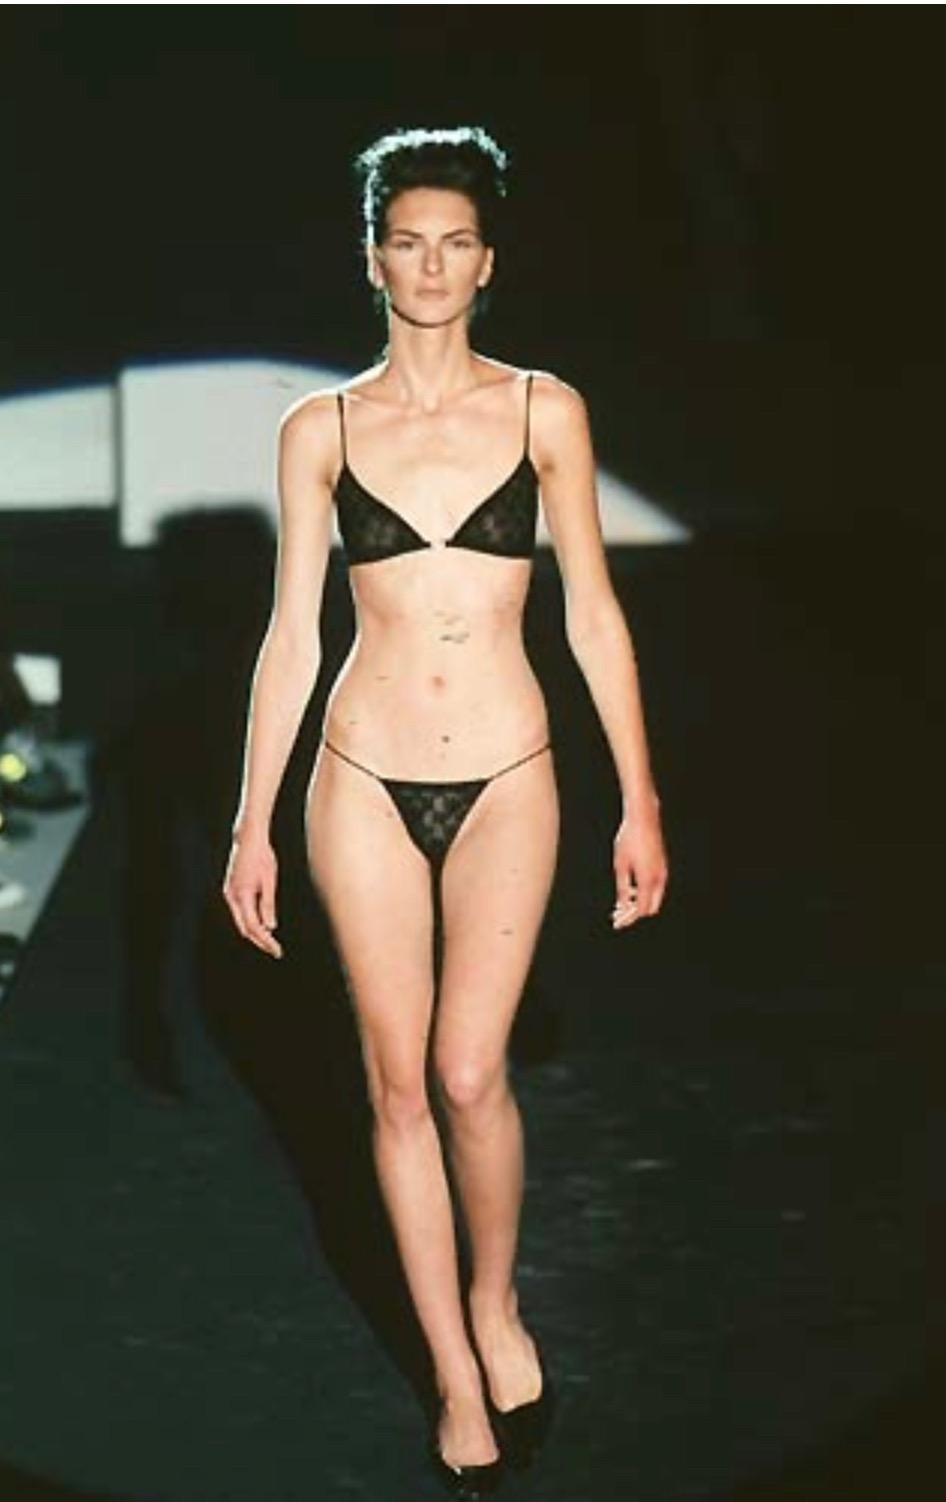 Presenting a fabulous black sheer Gucci 'GG' logo bra designed by Tom Ford. From the Spring/Summer 1998 collection, this stunning bralette debuted on the season's runway and has since been seen on Kim Kardashian. This sheer bra is made complete with